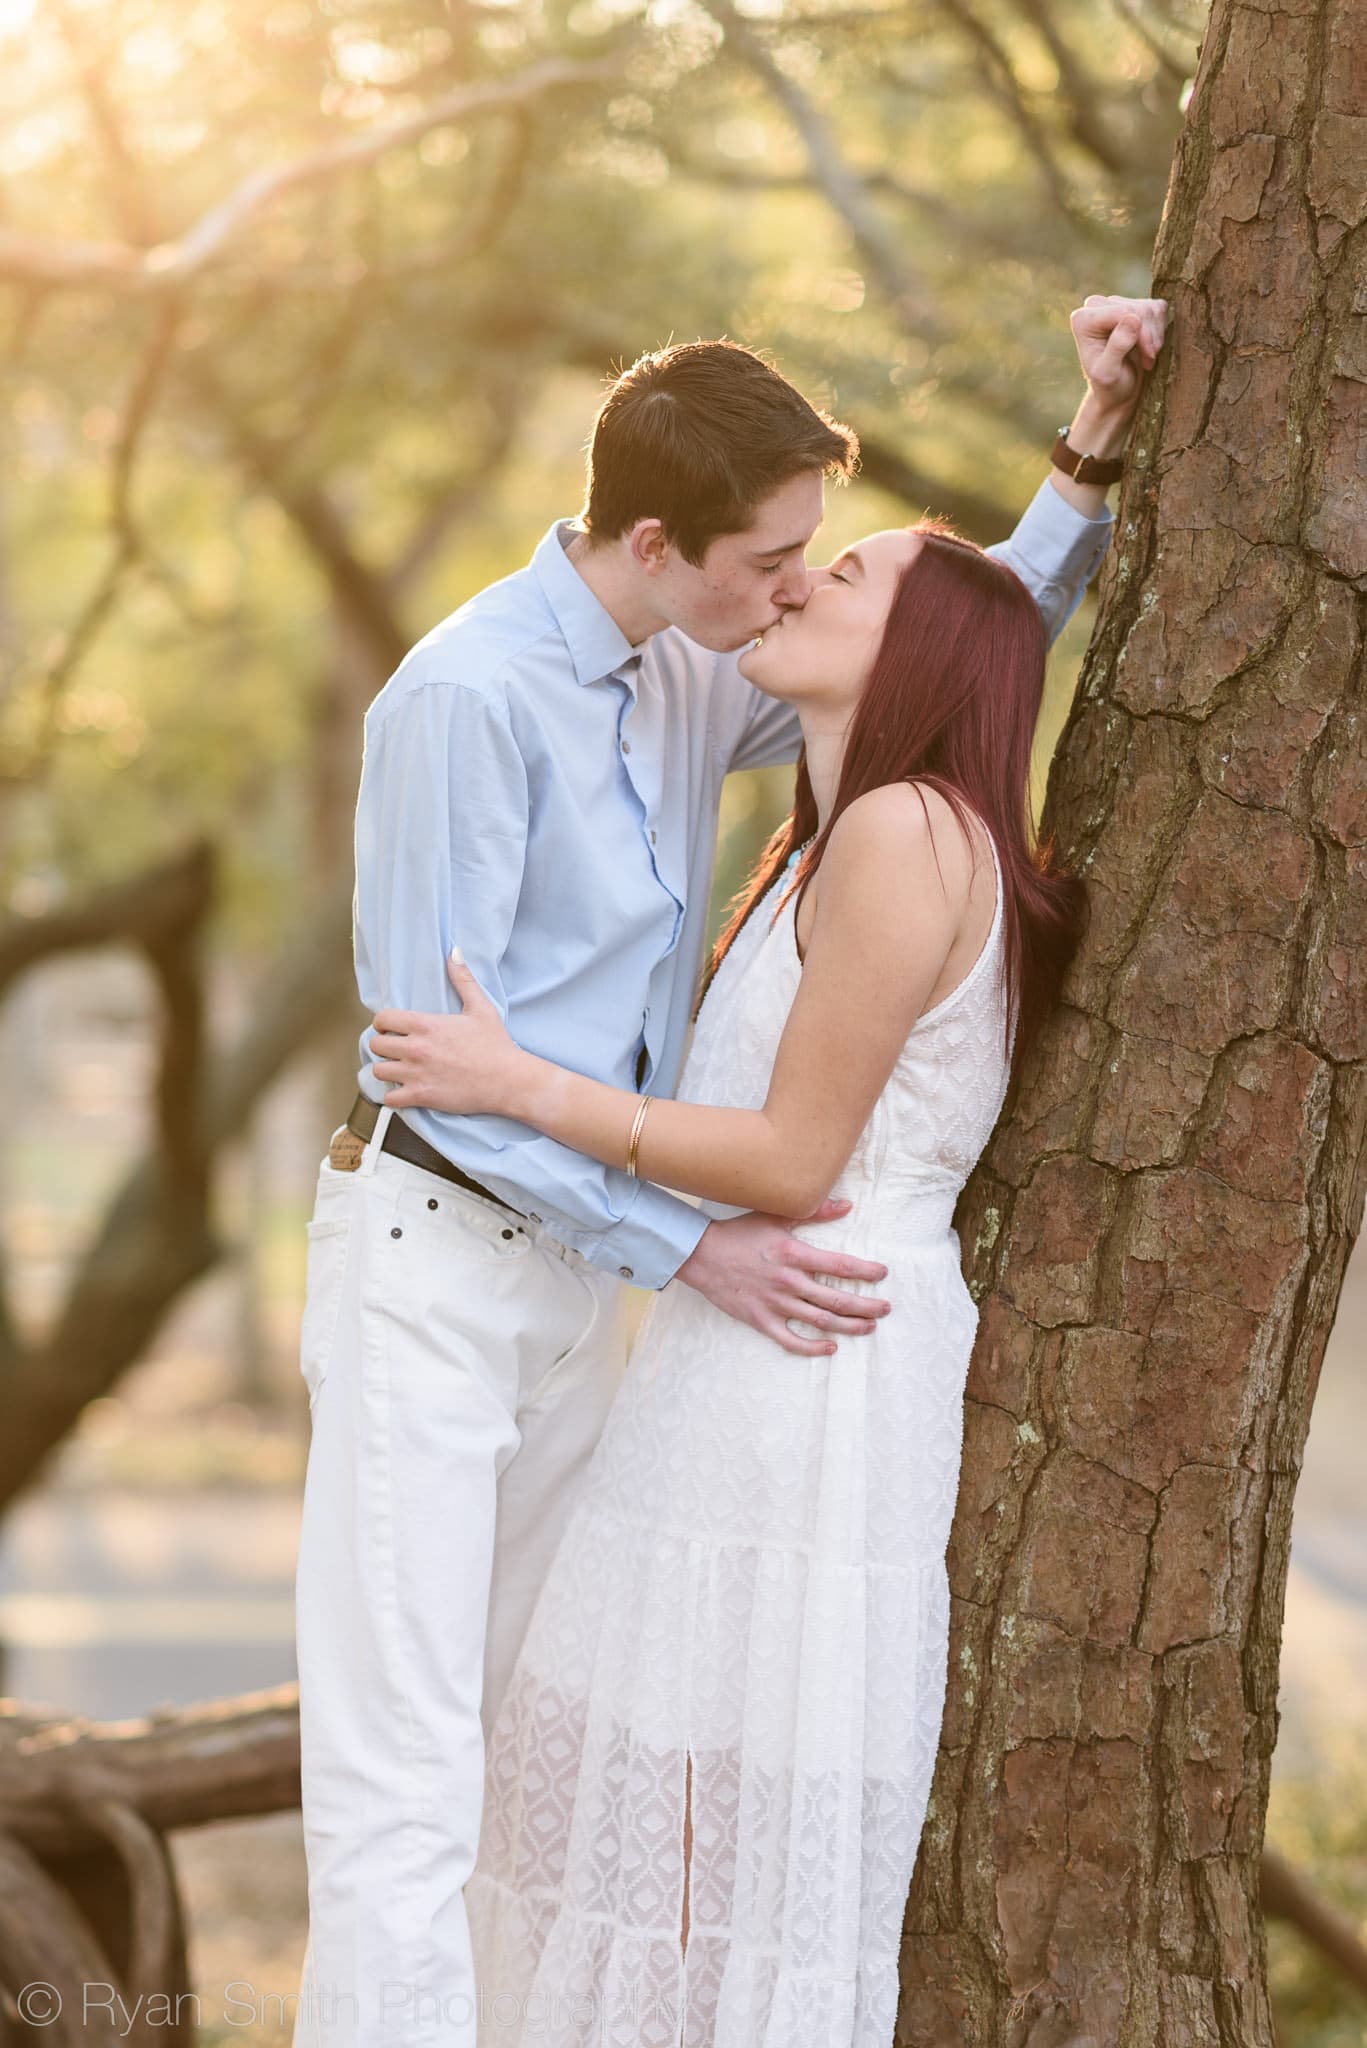 Kiss backlit by the sunlight in the trees - Myrtle Beach State Park